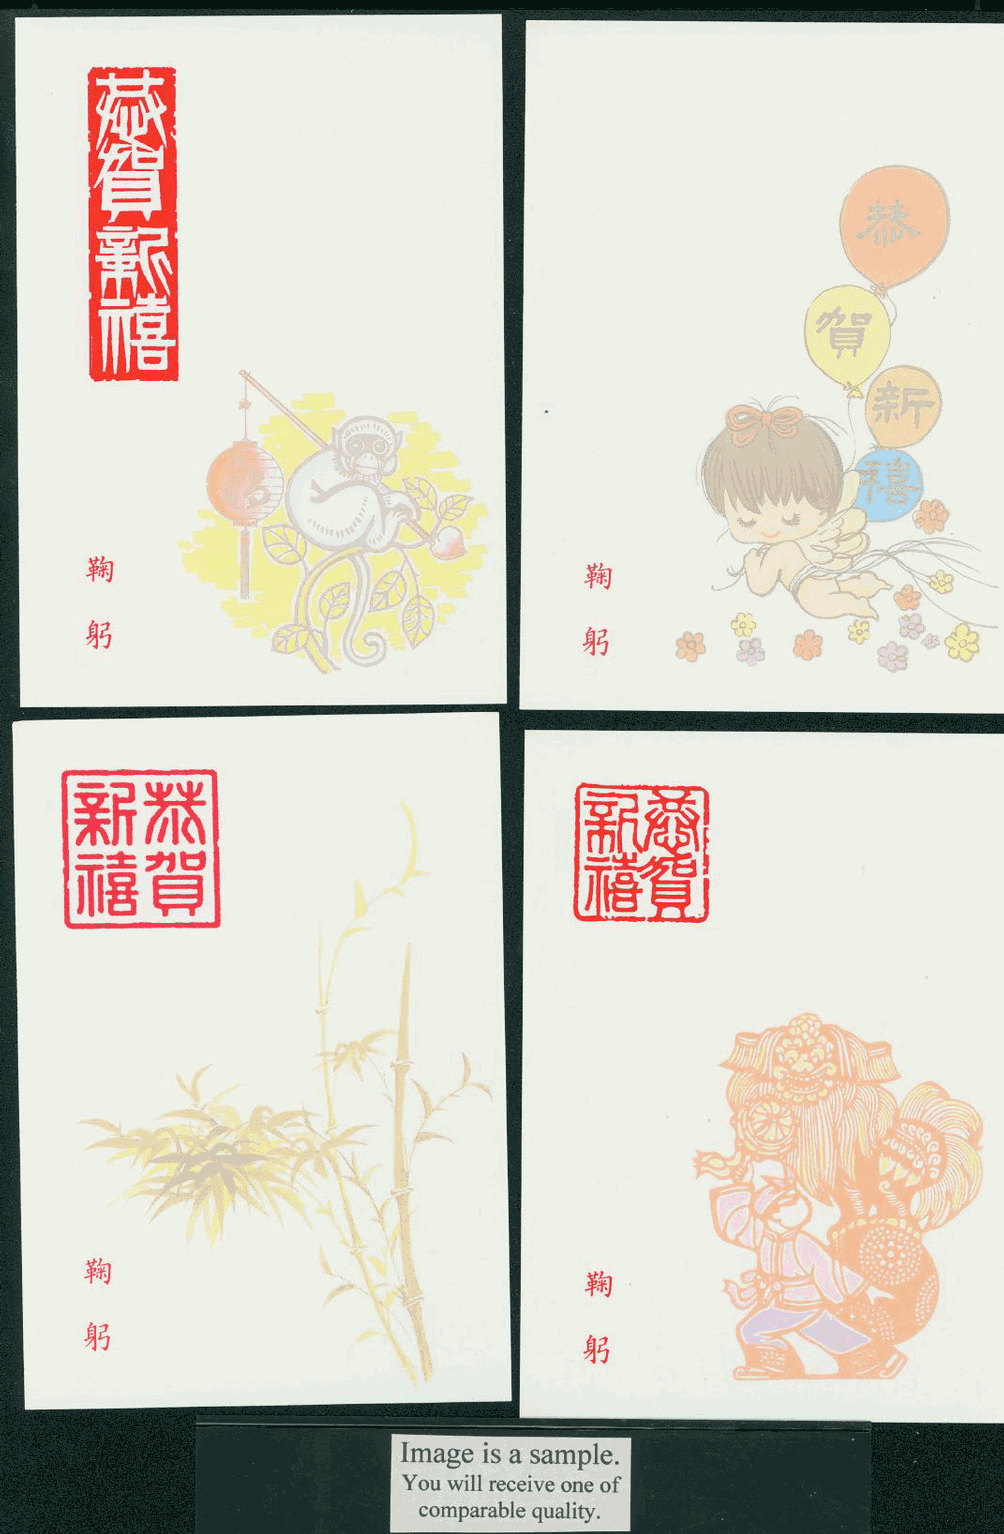 PCNY-52 to 55 1991 Taiwan New Year Postcard (2 images)